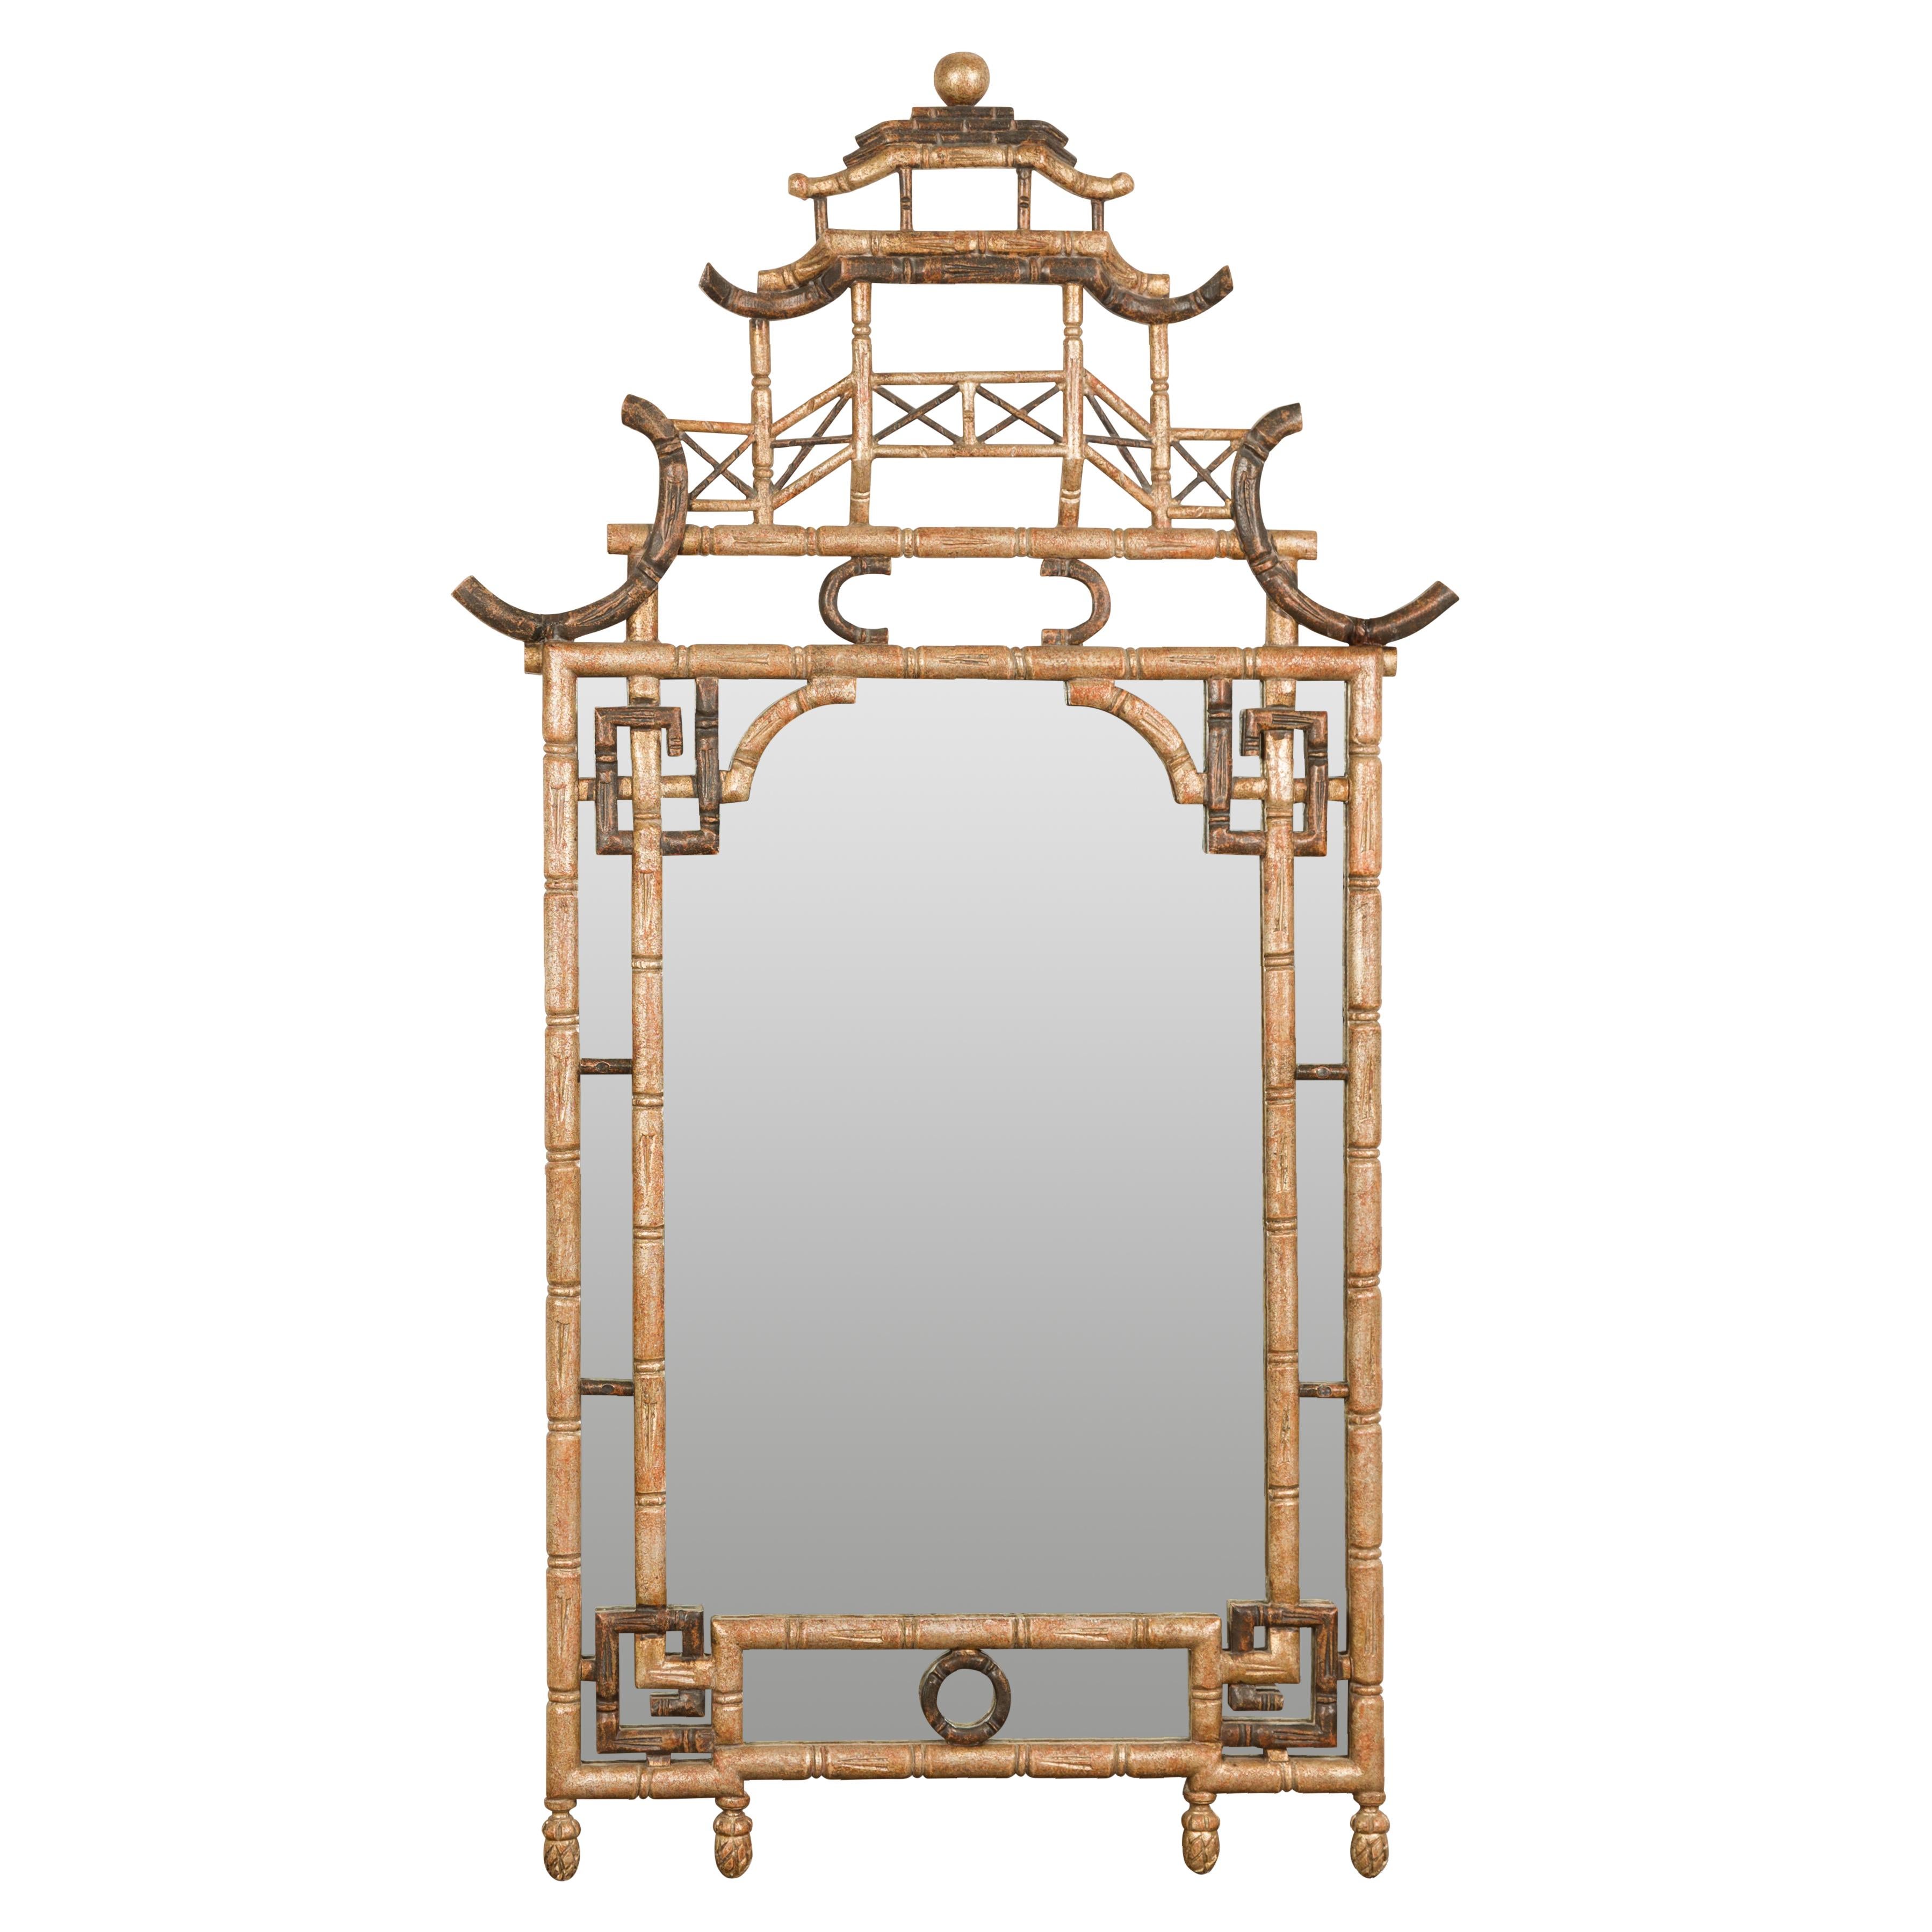 An English Pagoda mirror made of faux bamboo in the Chinese Chippendale style. Reflecting the elegant fusion of Eastern inspiration and English craftsmanship, this 20th-century Pagoda mirror epitomizes the Chinese Chippendale style. Composed of faux